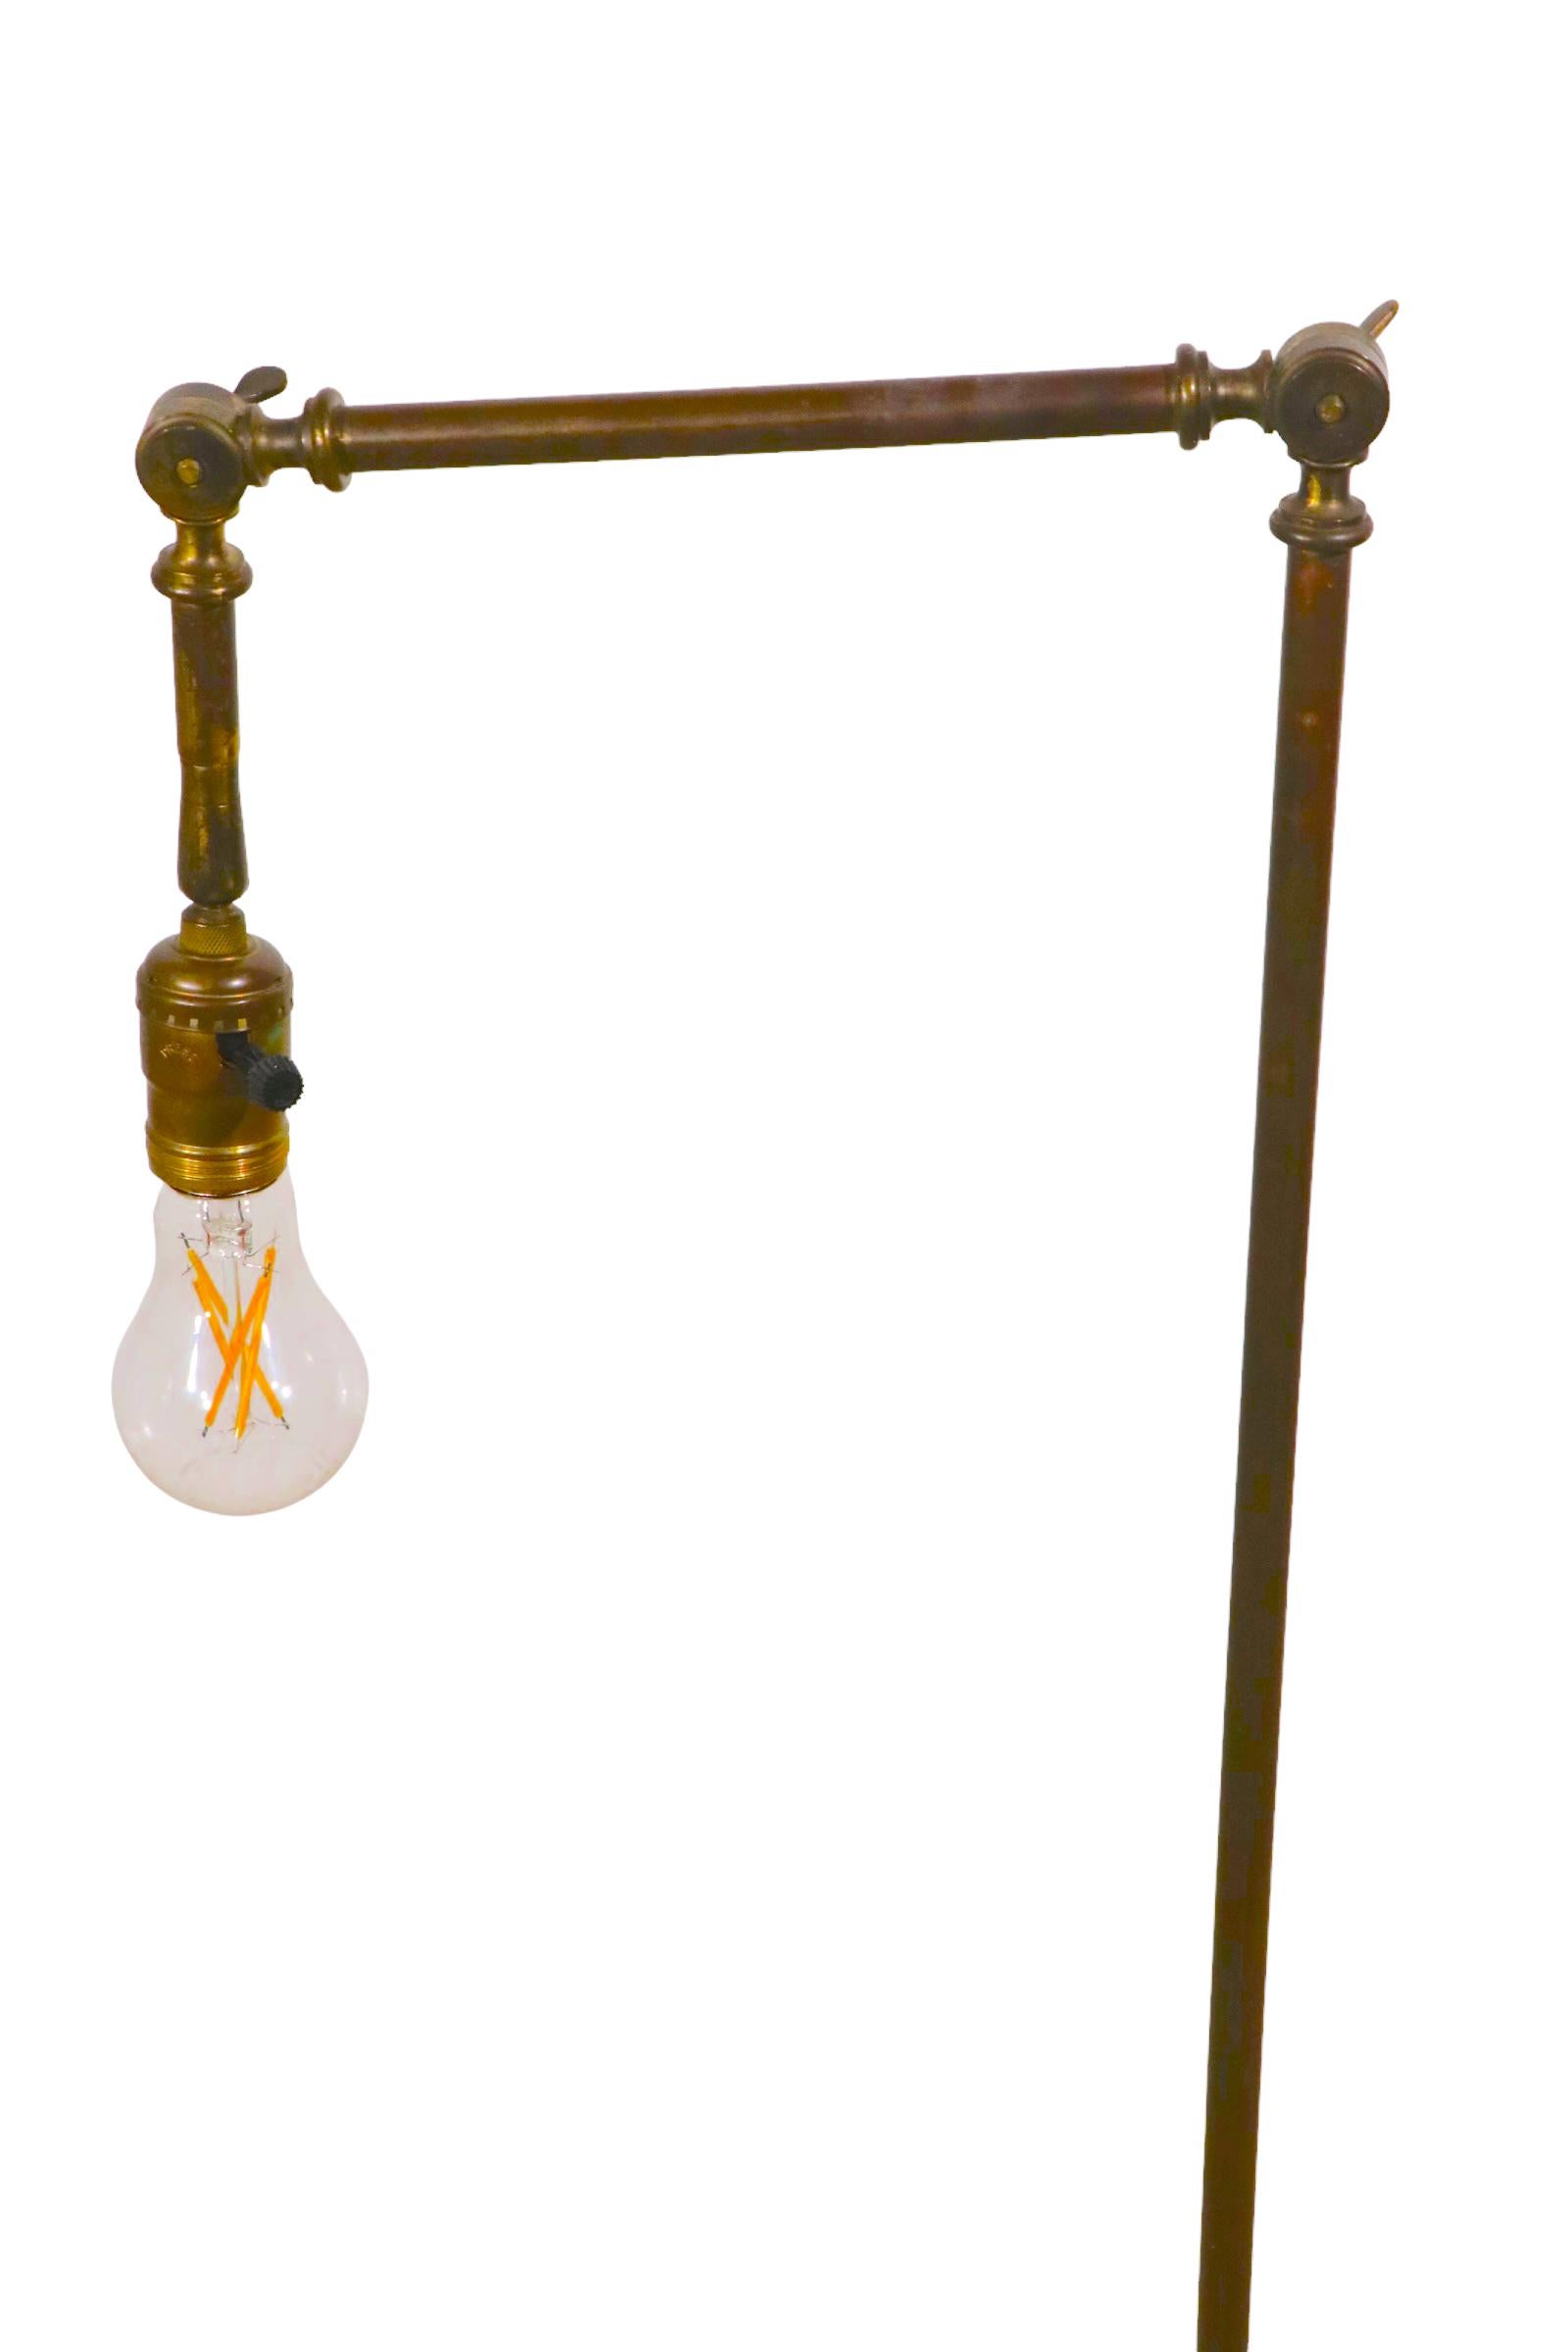 Articulating Brass Reading Floor Lamp in the Classical Style, C. 1900- 1930's For Sale 6